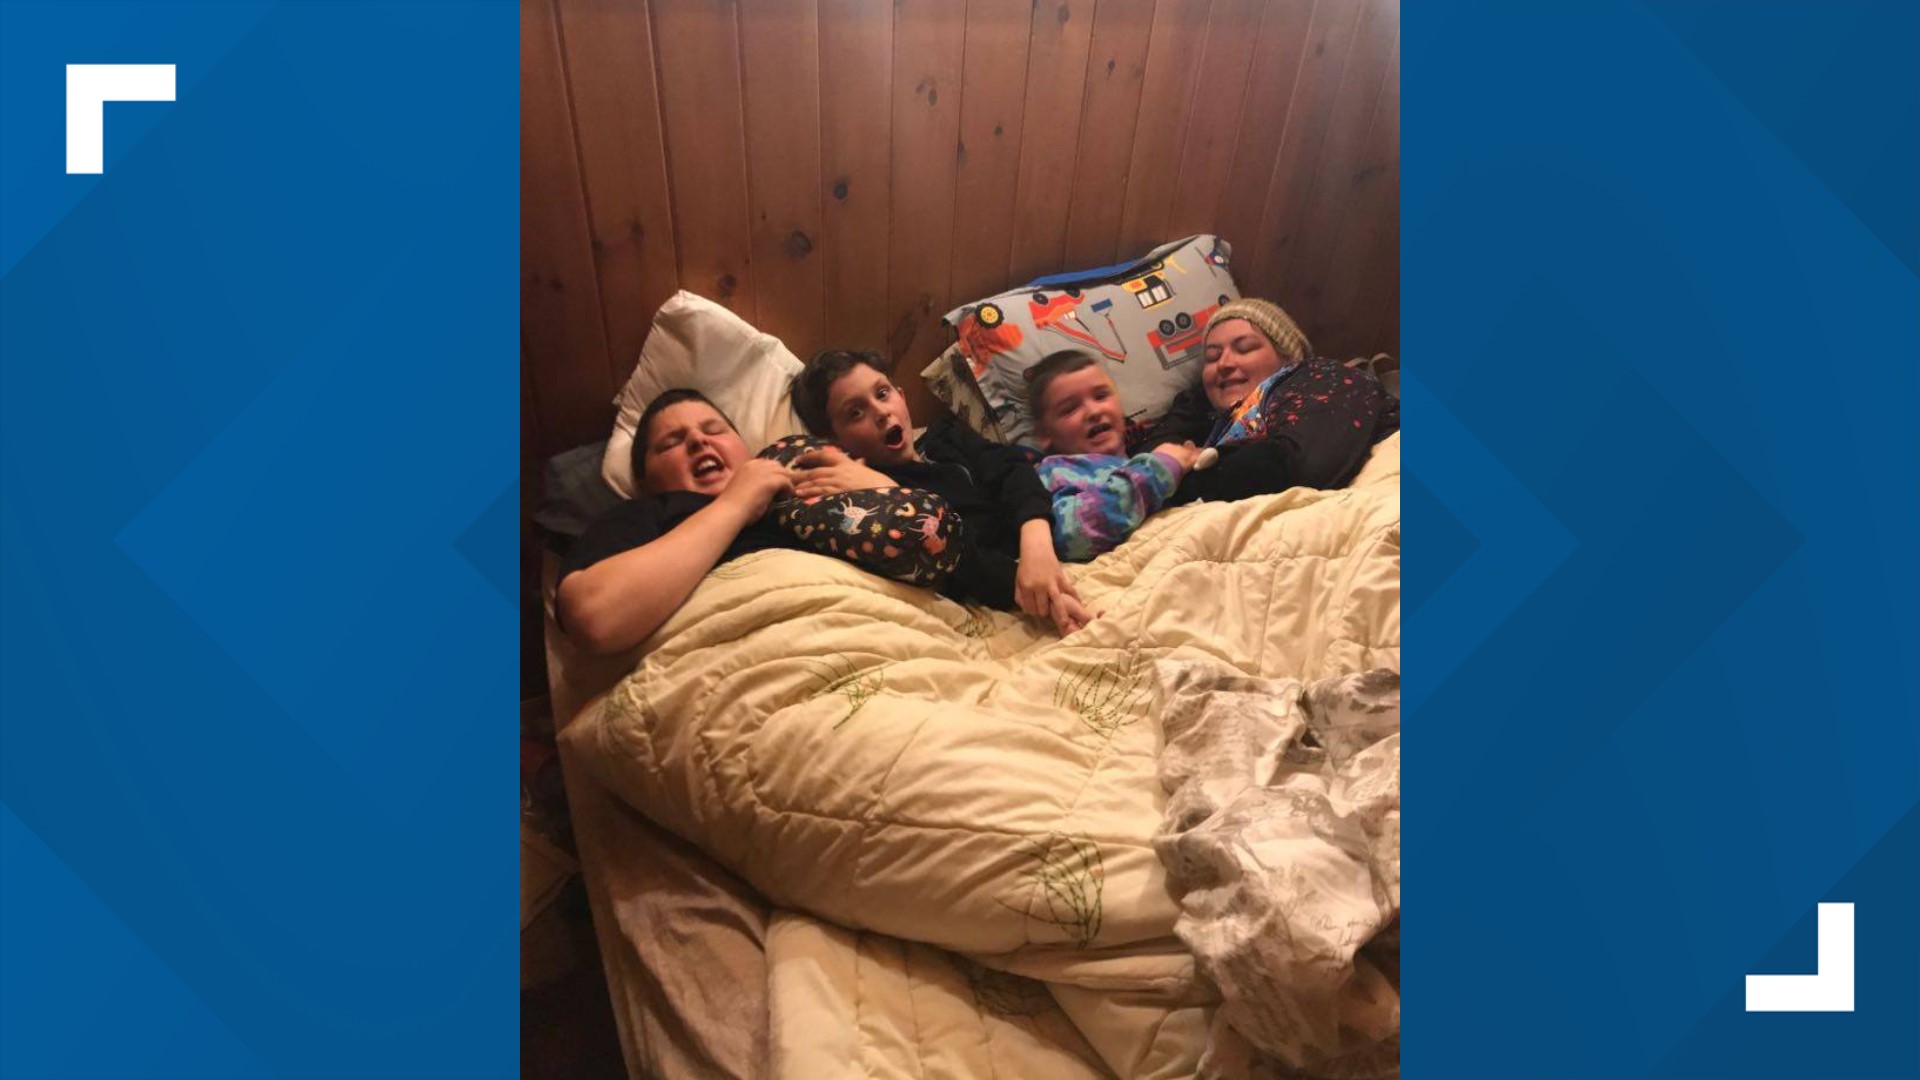 37-year-old Maryann Engelbert of Litchfield is a wife and a mother to three young boys. She has stage five kidney failure and needs a living donor.